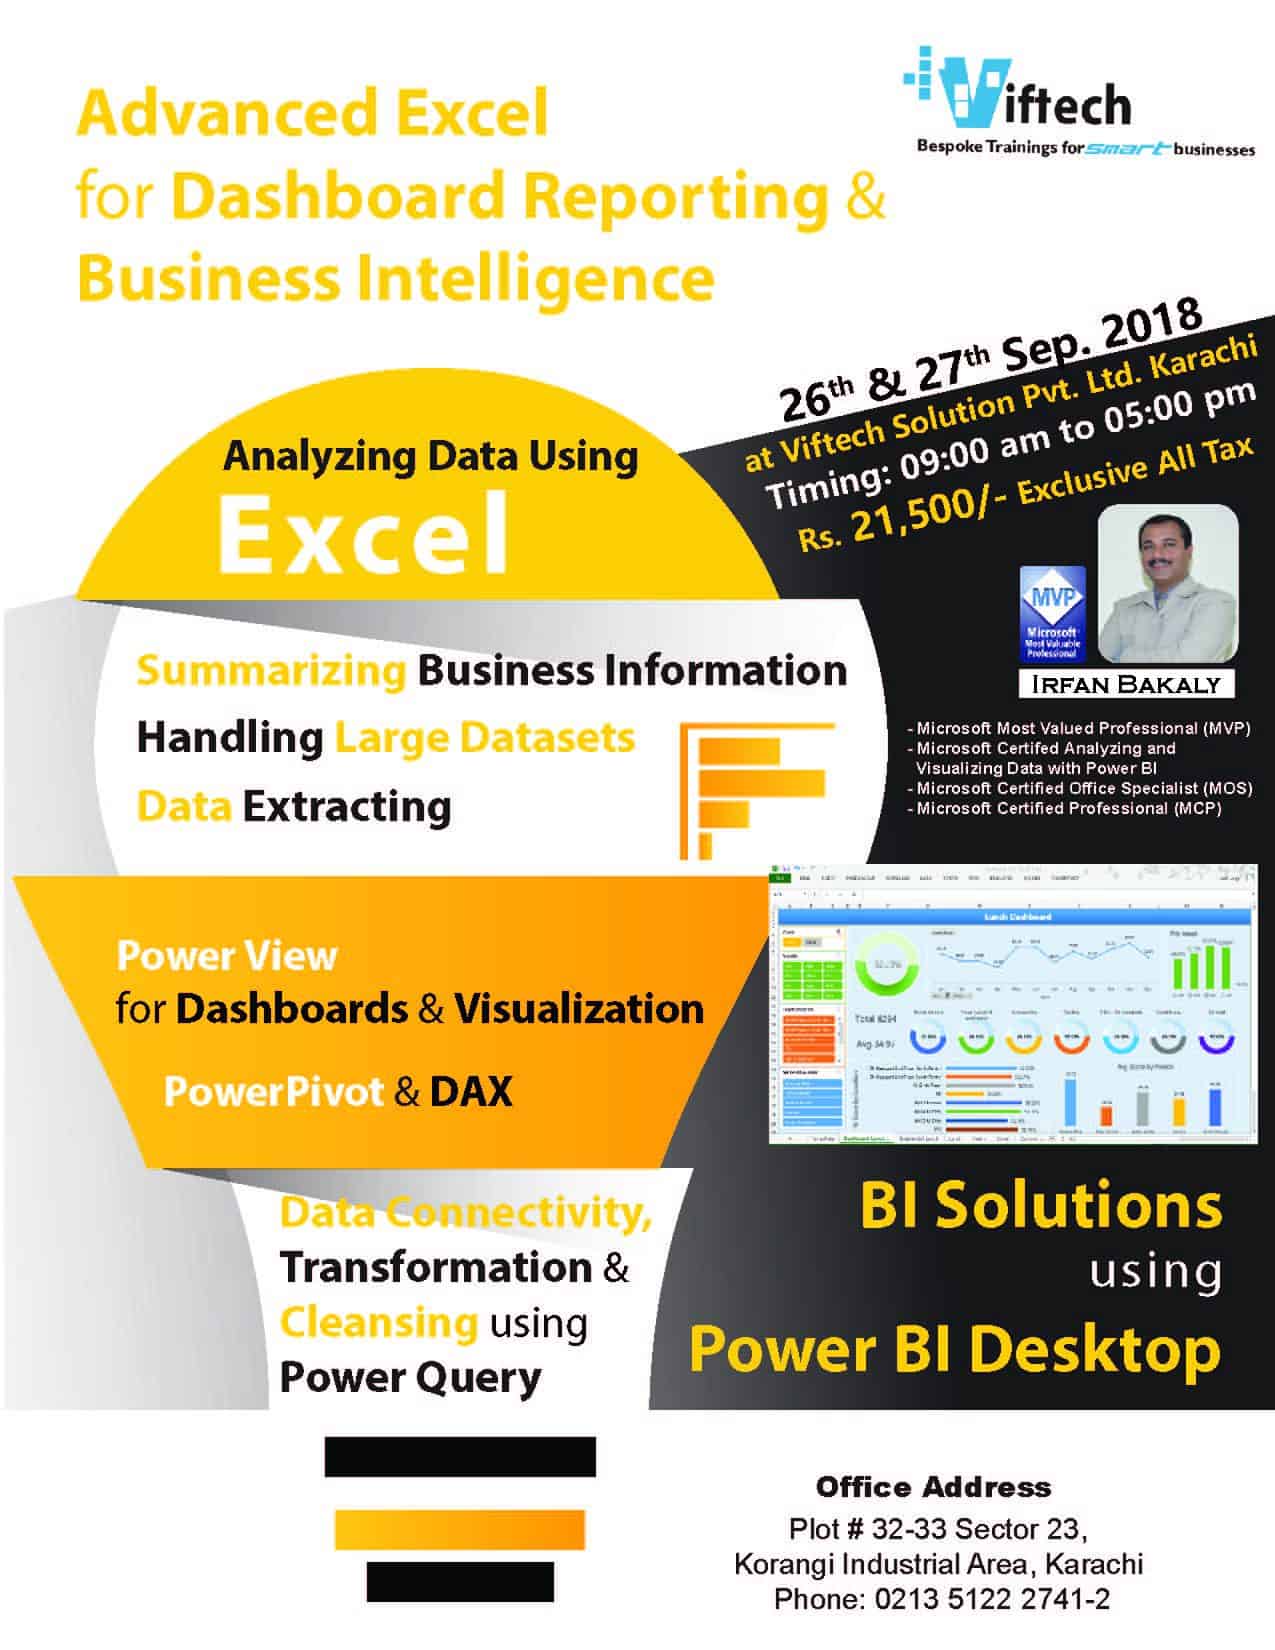 Advanced Excel for Dashboard Reporting & Business Intelligence